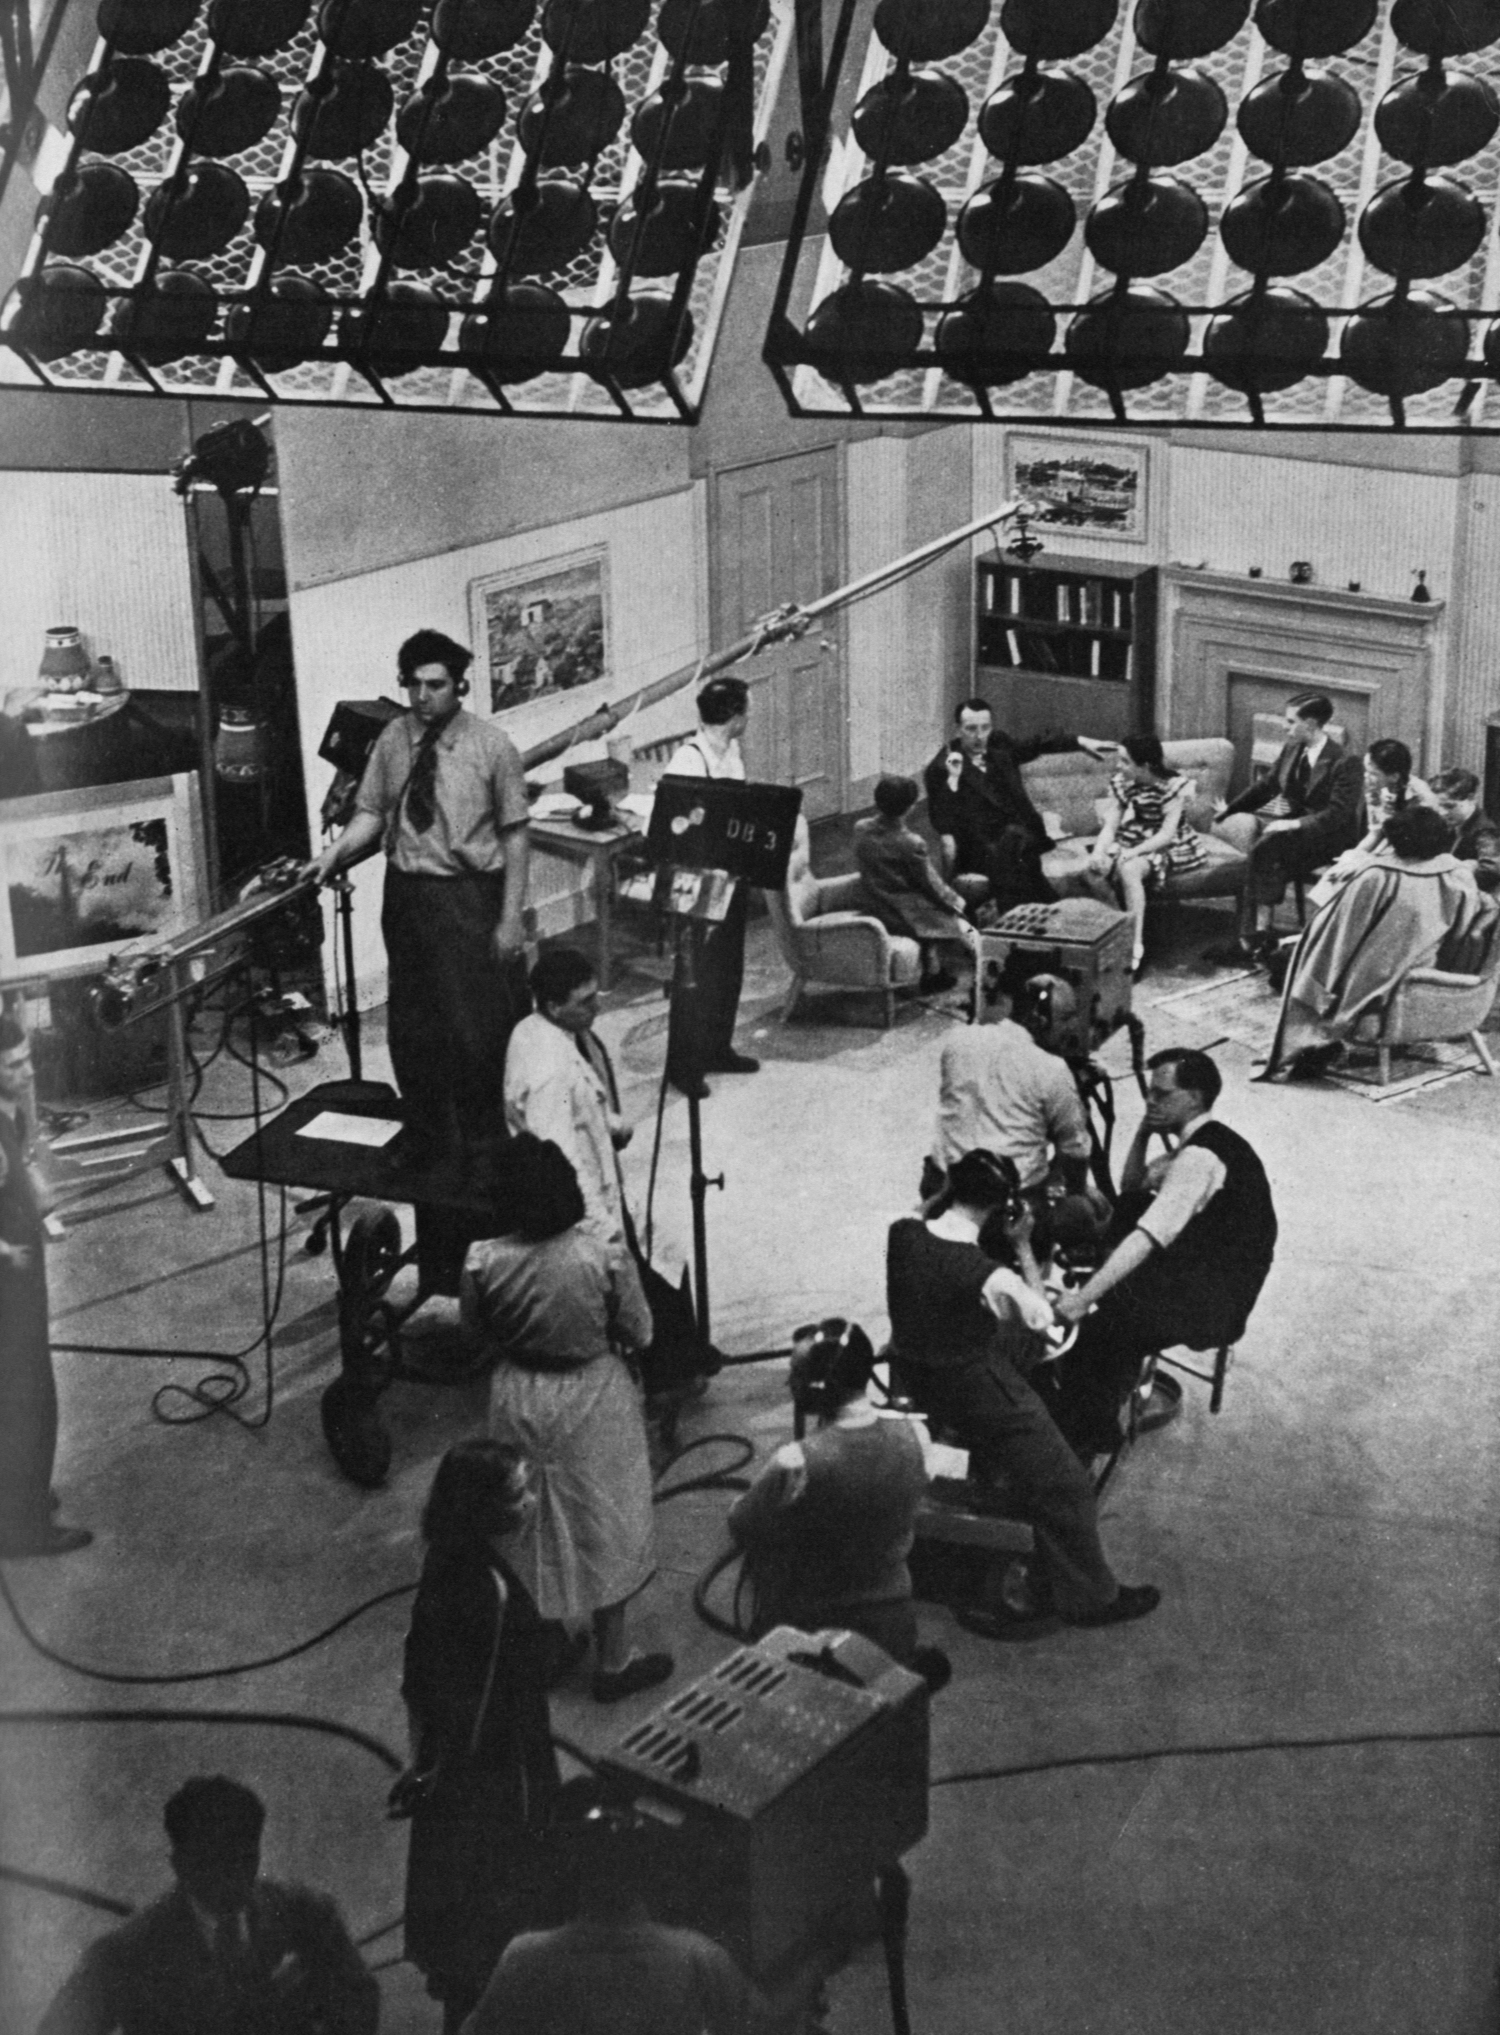 A view across a studio; people sit talking around a living room set